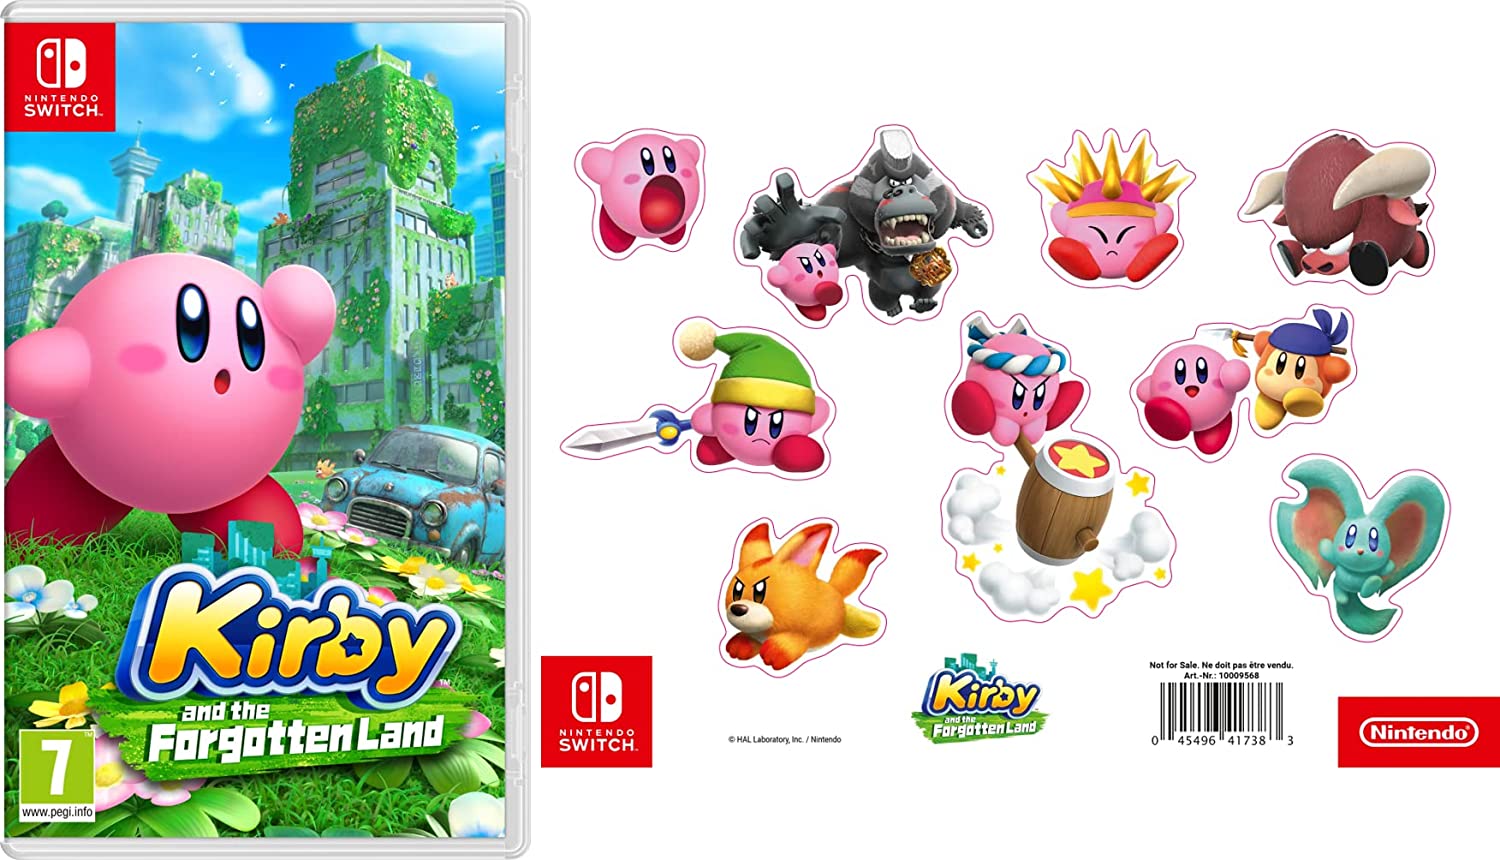 Get 15 per cent off when you pre-order Kirby and the Forgotten